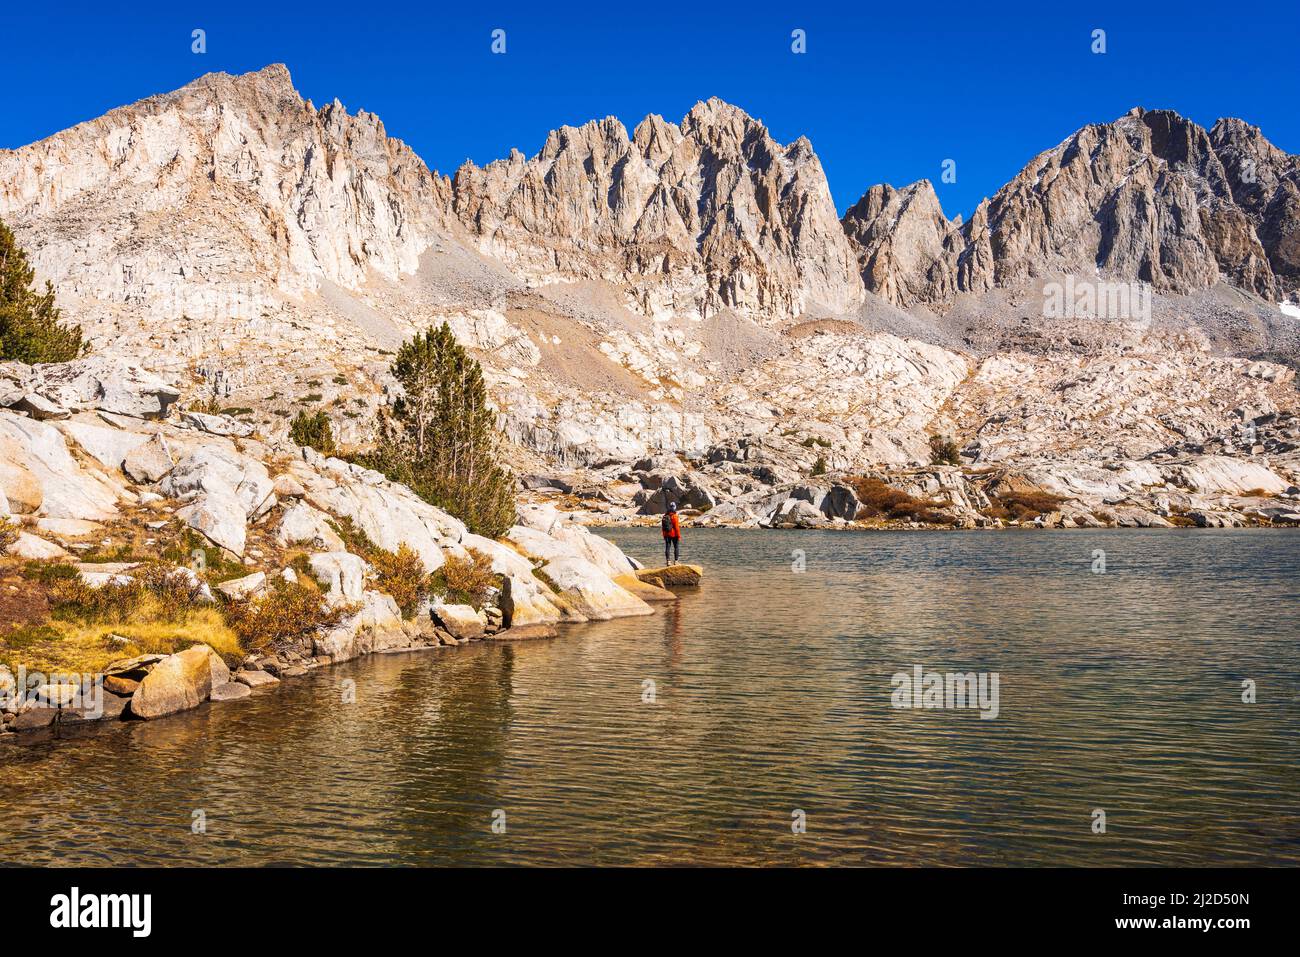 Hiker in Dusy Basin under the Palisades, Kings Canyon National Park, California USA Stock Photo